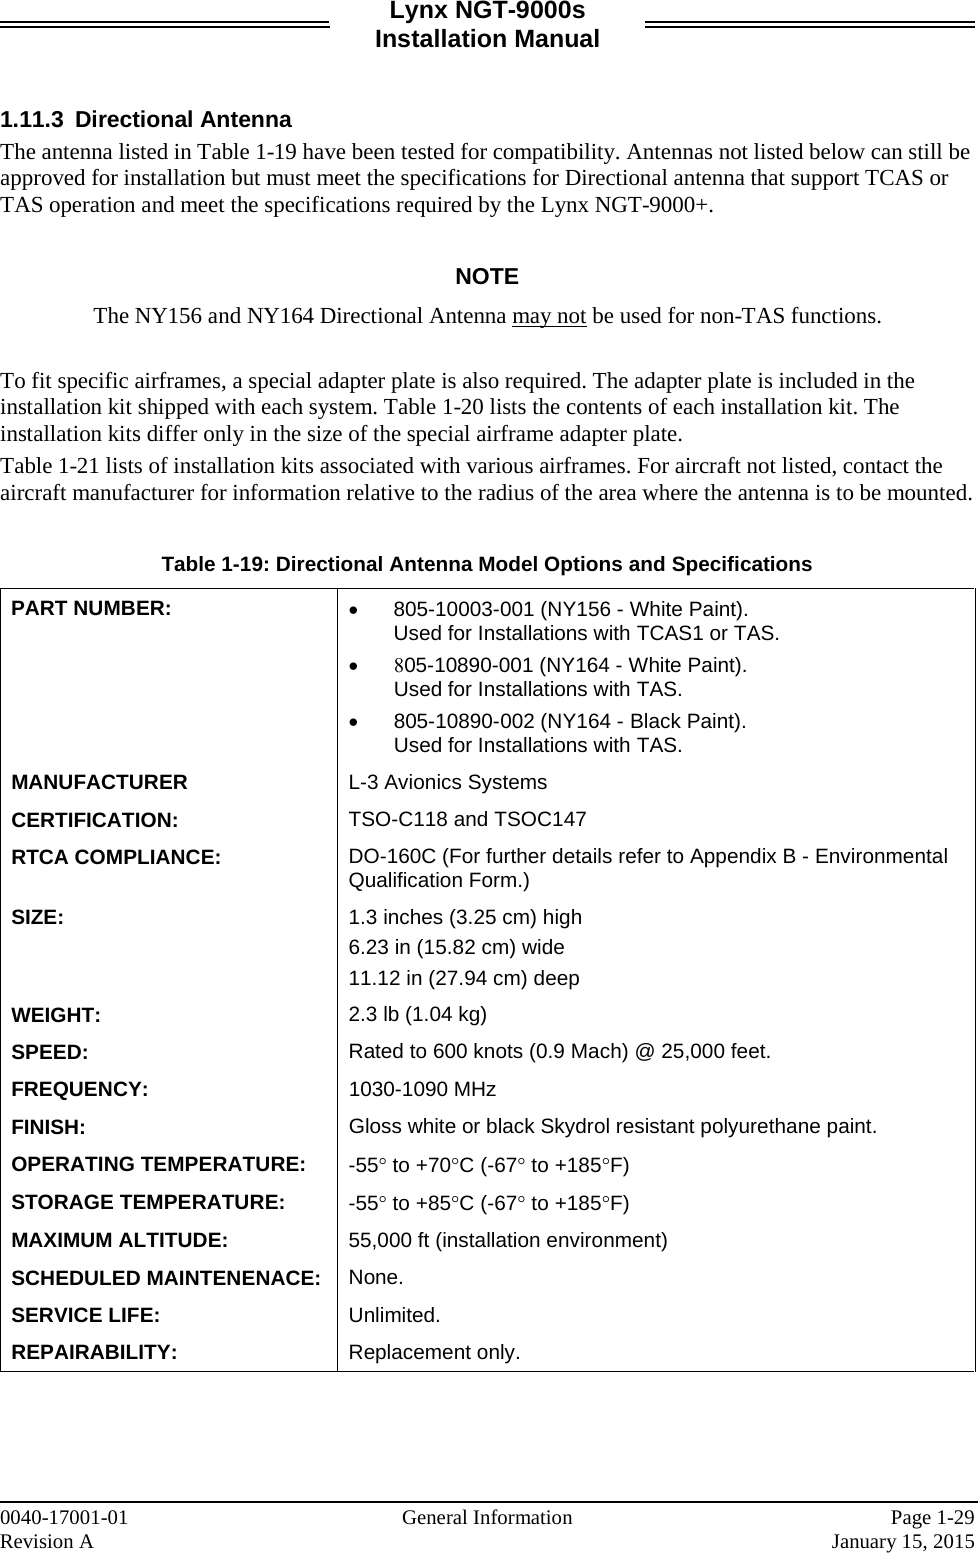 Lynx NGT-9000s Installation Manual   1.11.3 Directional Antenna The antenna listed in Table 1-19 have been tested for compatibility. Antennas not listed below can still be approved for installation but must meet the specifications for Directional antenna that support TCAS or TAS operation and meet the specifications required by the Lynx NGT-9000+.  NOTE The NY156 and NY164 Directional Antenna may not be used for non-TAS functions.  To fit specific airframes, a special adapter plate is also required. The adapter plate is included in the installation kit shipped with each system. Table 1-20 lists the contents of each installation kit. The installation kits differ only in the size of the special airframe adapter plate. Table 1-21 lists of installation kits associated with various airframes. For aircraft not listed, contact the aircraft manufacturer for information relative to the radius of the area where the antenna is to be mounted.  Table 1-19: Directional Antenna Model Options and Specifications PART NUMBER: • 805-10003-001 (NY156 - White Paint).  Used for Installations with TCAS1 or TAS. • 805-10890-001 (NY164 - White Paint).  Used for Installations with TAS.  • 805-10890-002 (NY164 - Black Paint).  Used for Installations with TAS.  MANUFACTURER L-3 Avionics Systems CERTIFICATION:  TSO-C118 and TSOC147 RTCA COMPLIANCE: DO-160C (For further details refer to Appendix B - Environmental Qualification Form.) SIZE: 1.3 inches (3.25 cm) high 6.23 in (15.82 cm) wide 11.12 in (27.94 cm) deep WEIGHT: 2.3 lb (1.04 kg) SPEED: Rated to 600 knots (0.9 Mach) @ 25,000 feet. FREQUENCY: 1030-1090 MHz FINISH: Gloss white or black Skydrol resistant polyurethane paint. OPERATING TEMPERATURE: -55° to +70°C (-67° to +185°F) STORAGE TEMPERATURE:  -55° to +85°C (-67° to +185°F) MAXIMUM ALTITUDE: 55,000 ft (installation environment) SCHEDULED MAINTENENACE: None. SERVICE LIFE: Unlimited. REPAIRABILITY: Replacement only.     0040-17001-01    General Information Page 1-29 Revision A     January 15, 2015 